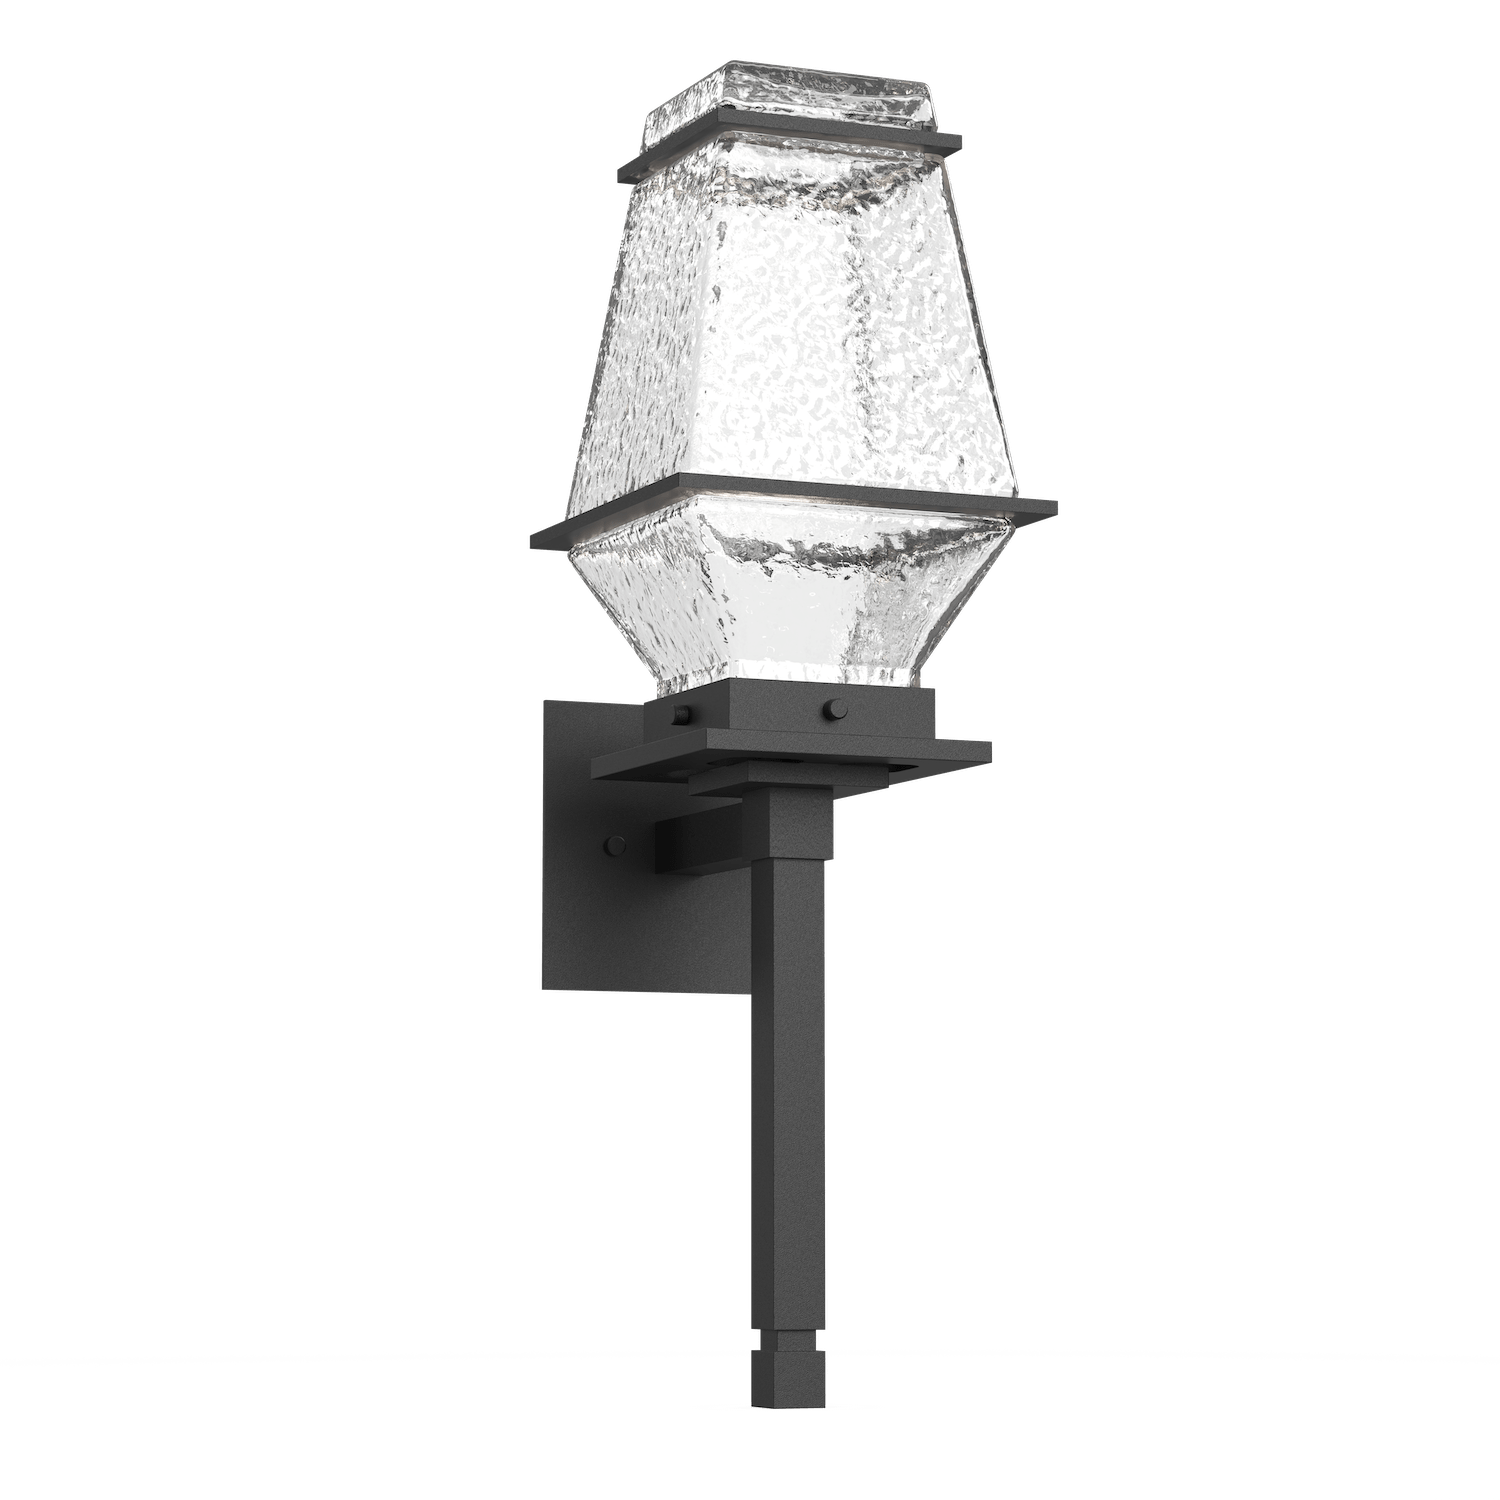 ODB0077-03-TB-C-Hammerton-Studio-Landmark-24-inch-outdoor-torch-sconce-with-textured-black-finish-and-clear-blown-glass-shades-and-LED-lamping